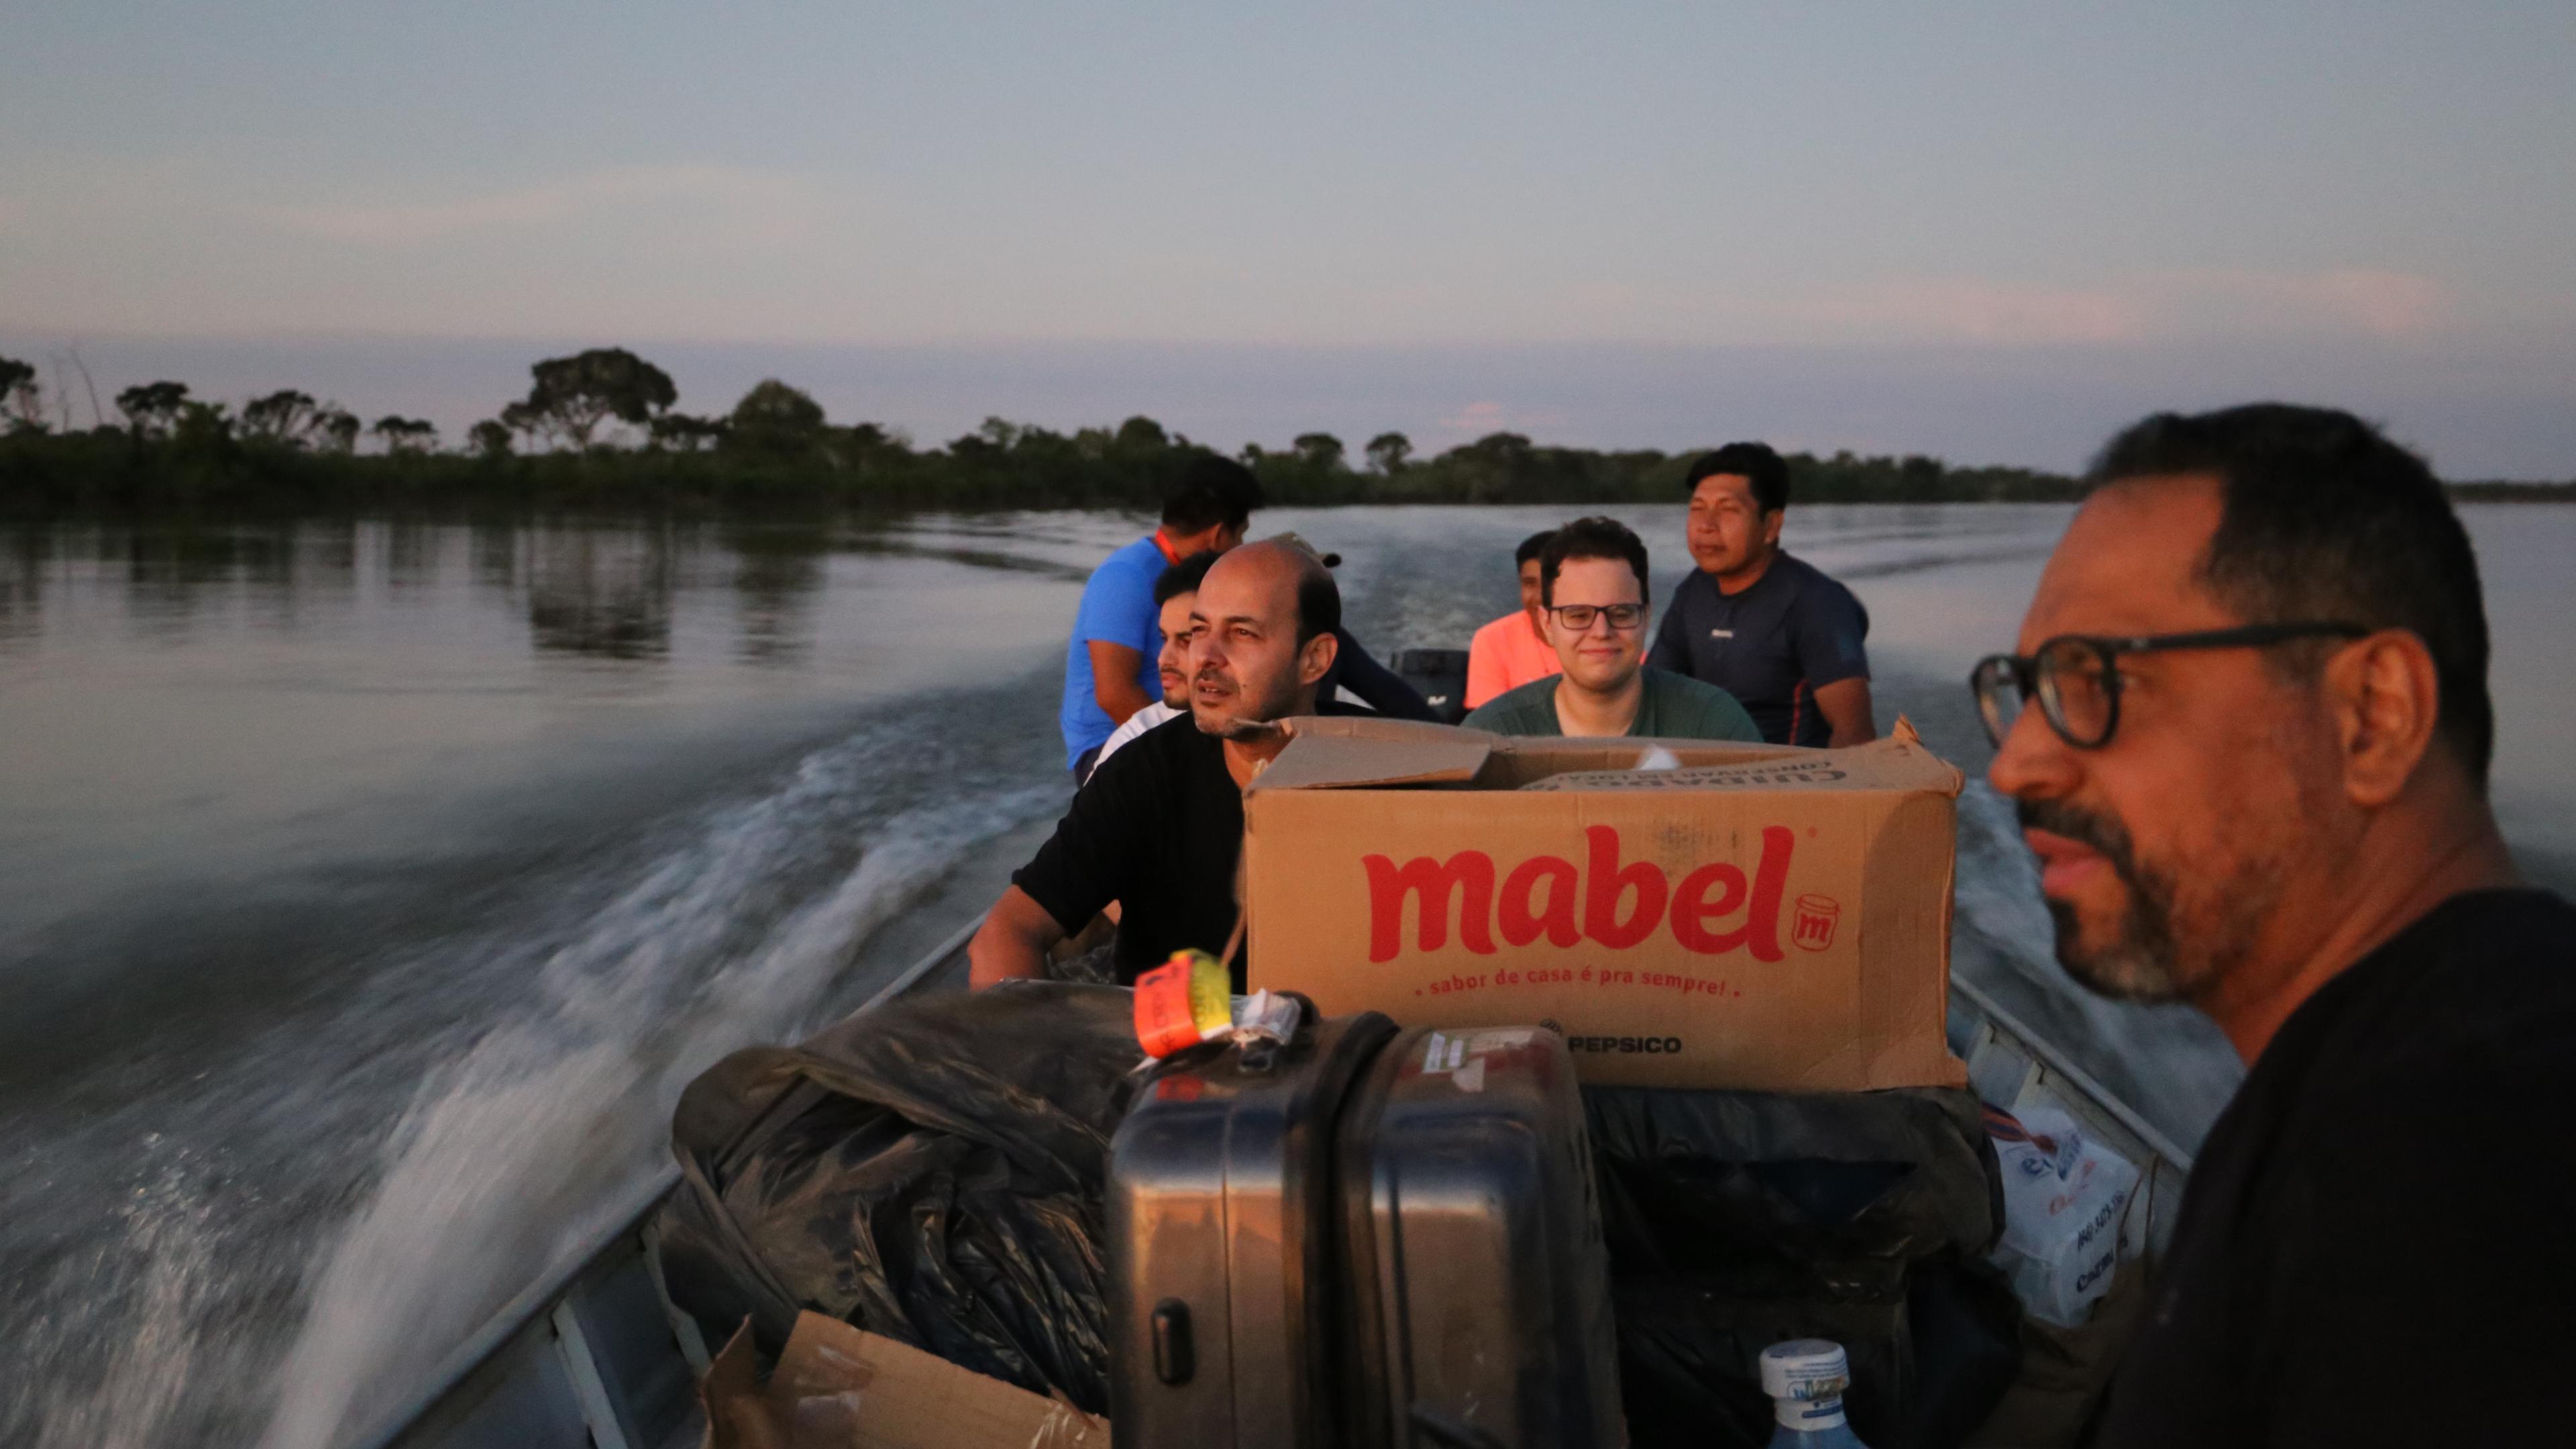 Arrival by boat on the Amazon